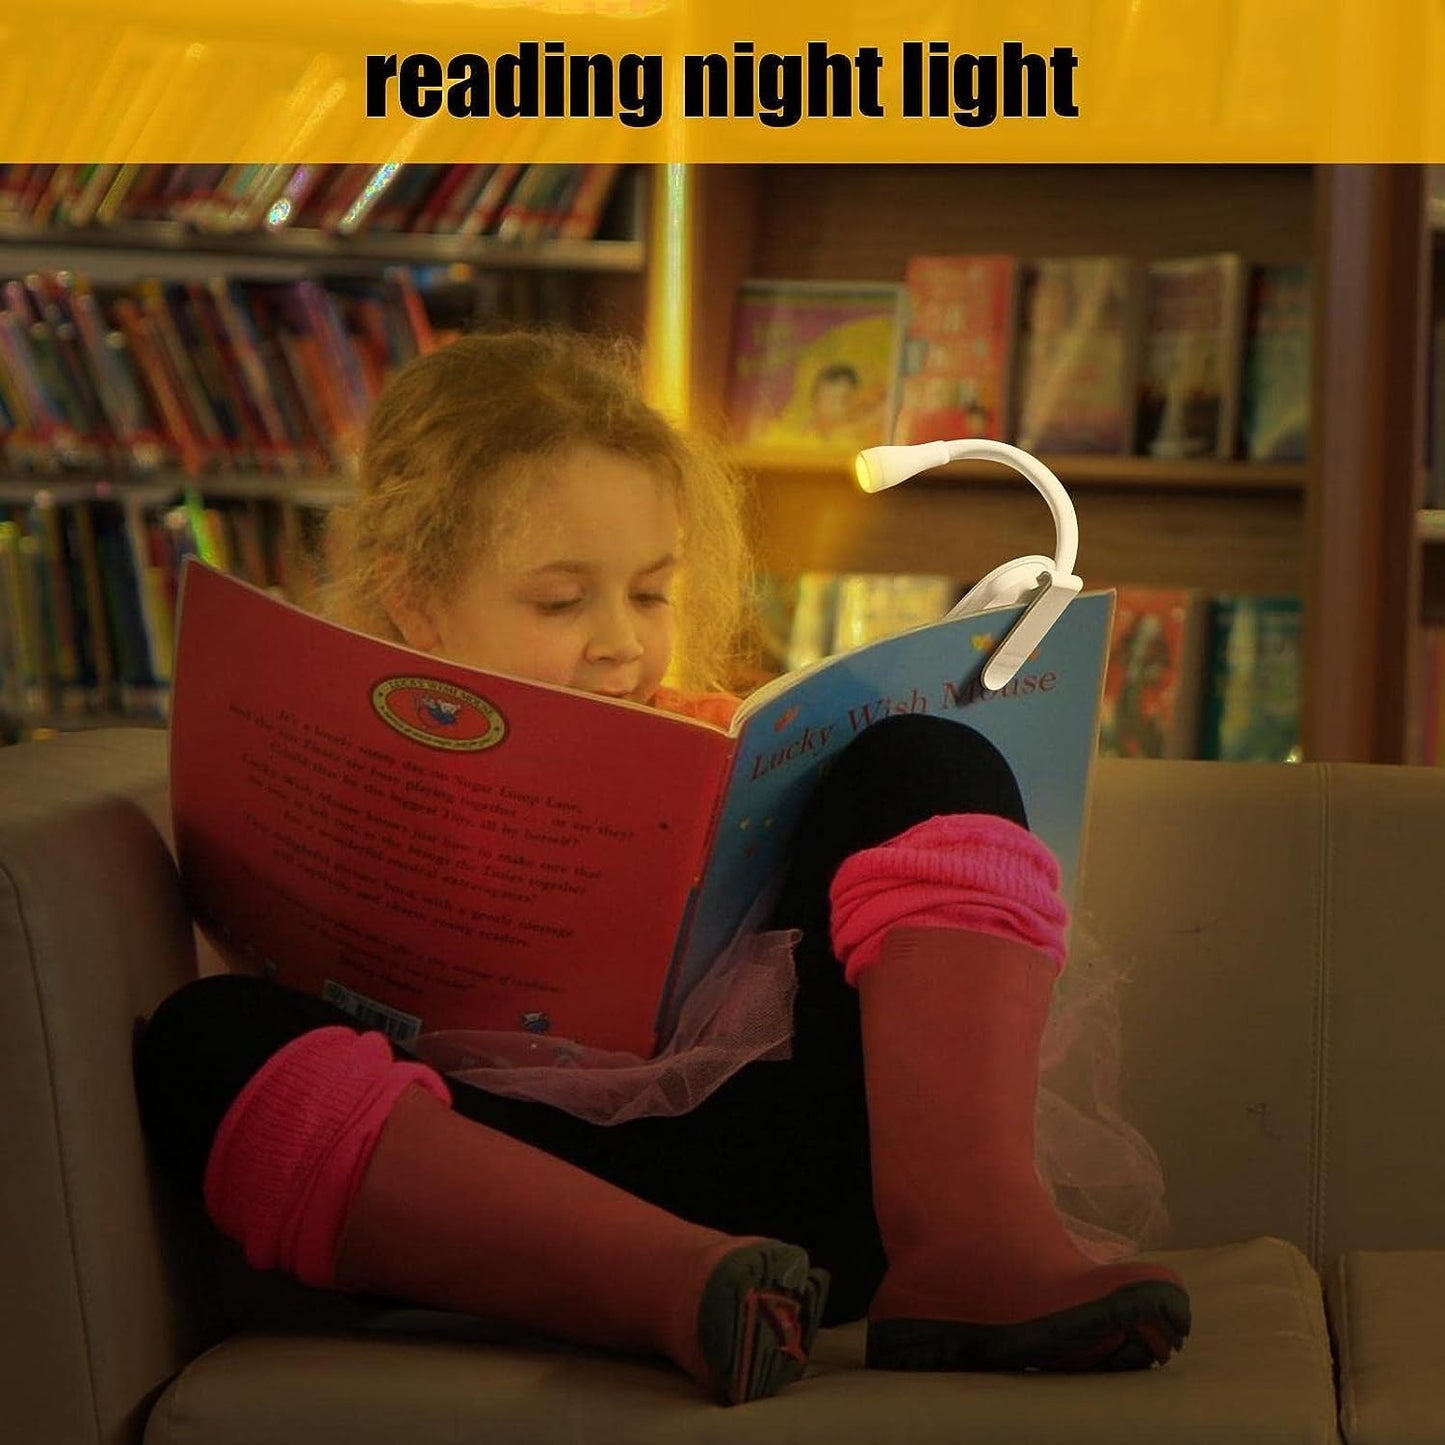 Book Light for Night Reading, Reading Light, Book Reading Light with Clip, Christmas Gifts, USB Rechargeable, 3 Modes, Portable, Eye Caring - White